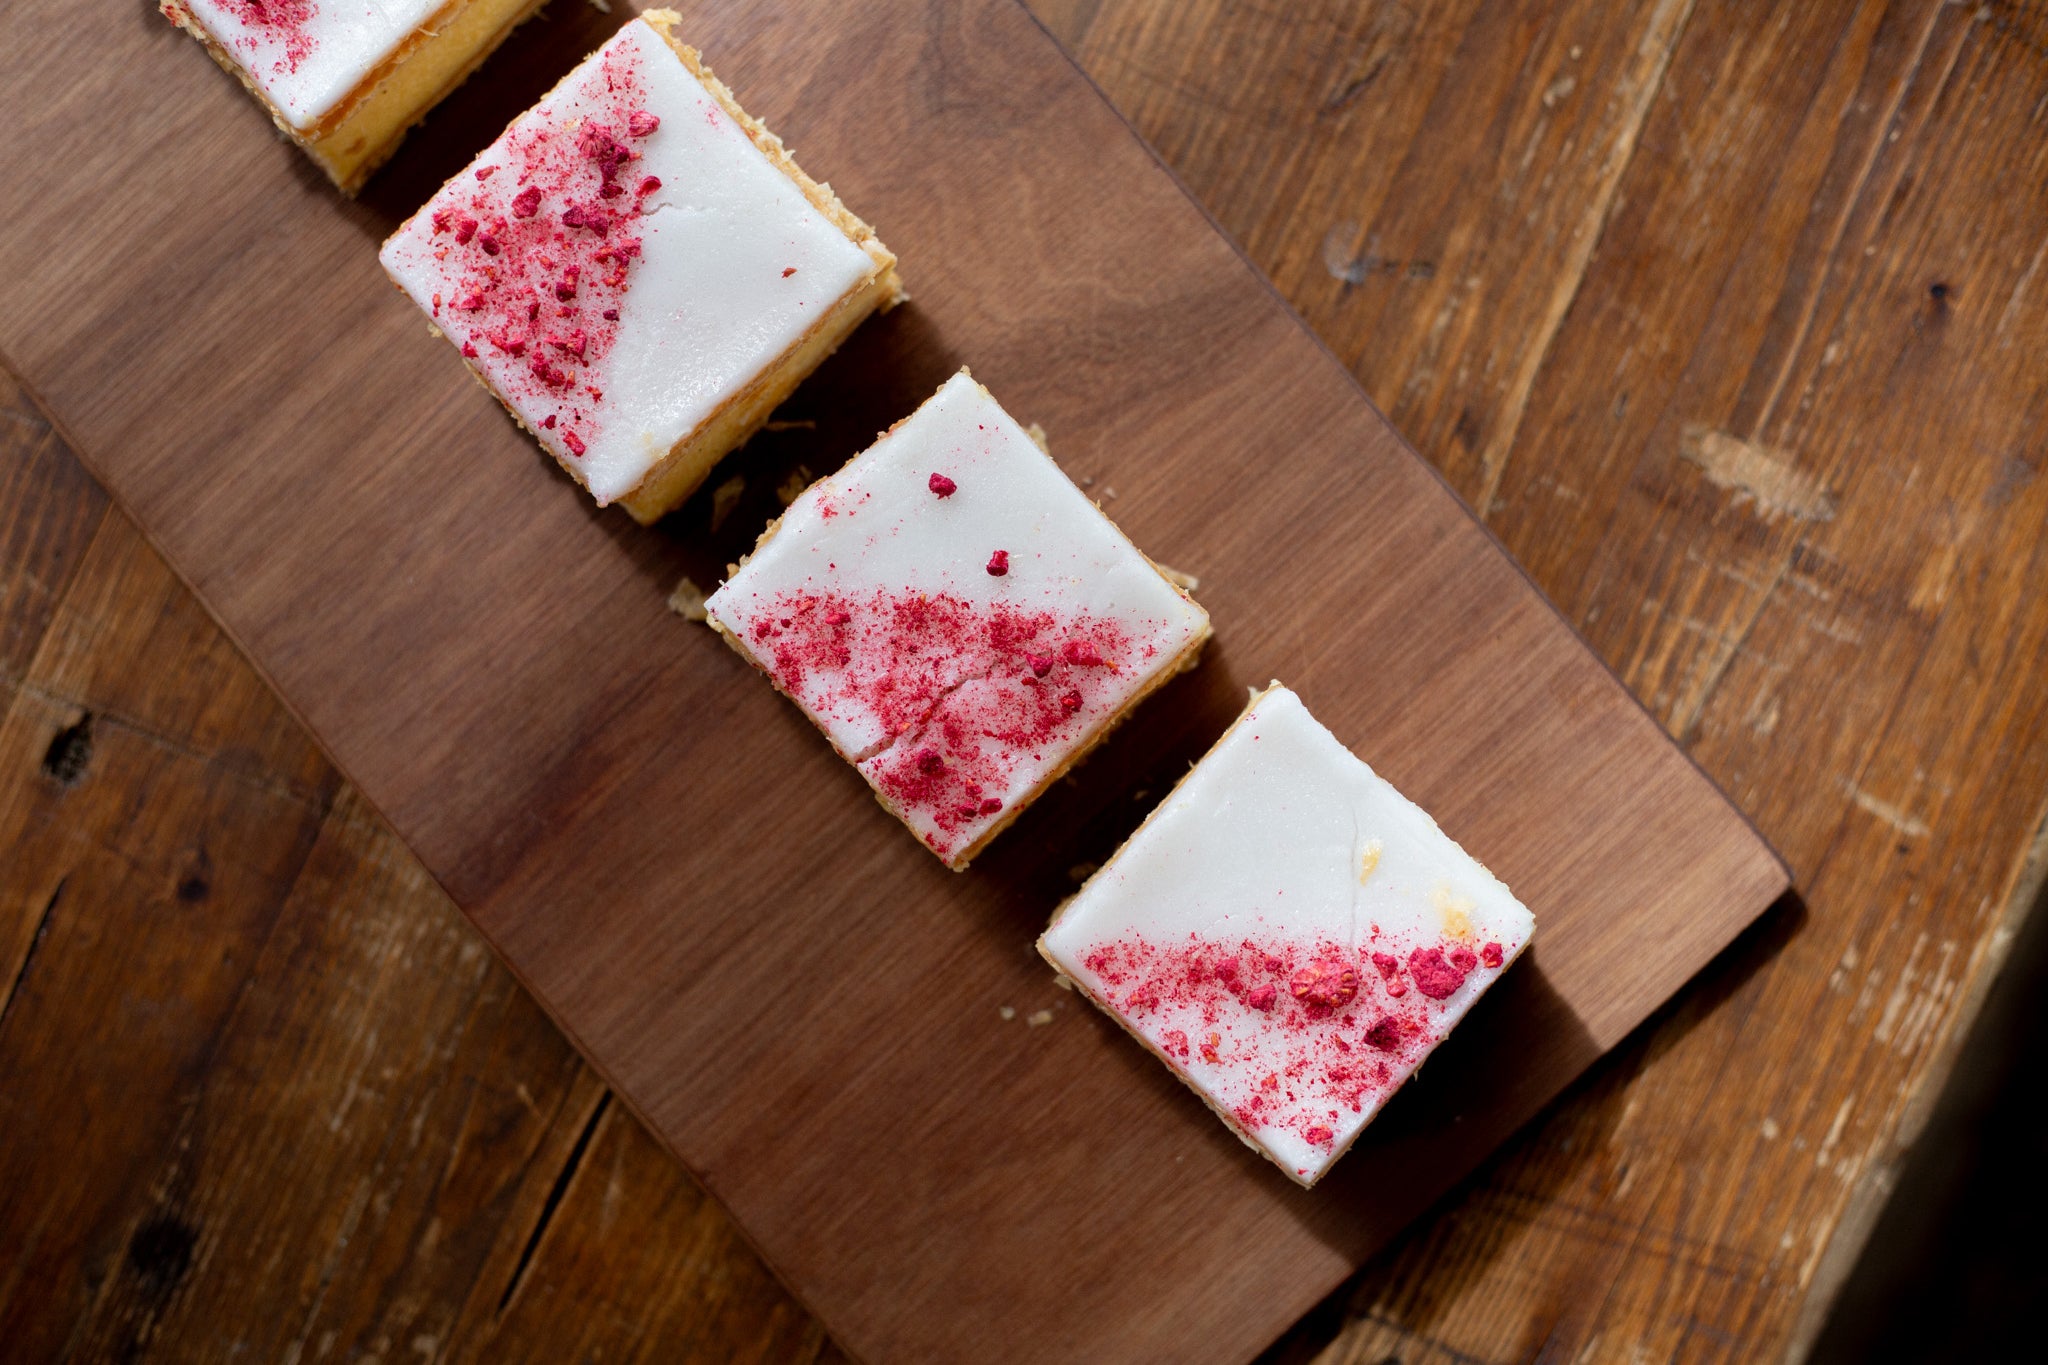 Top down view of four award-winning Volare custard squares